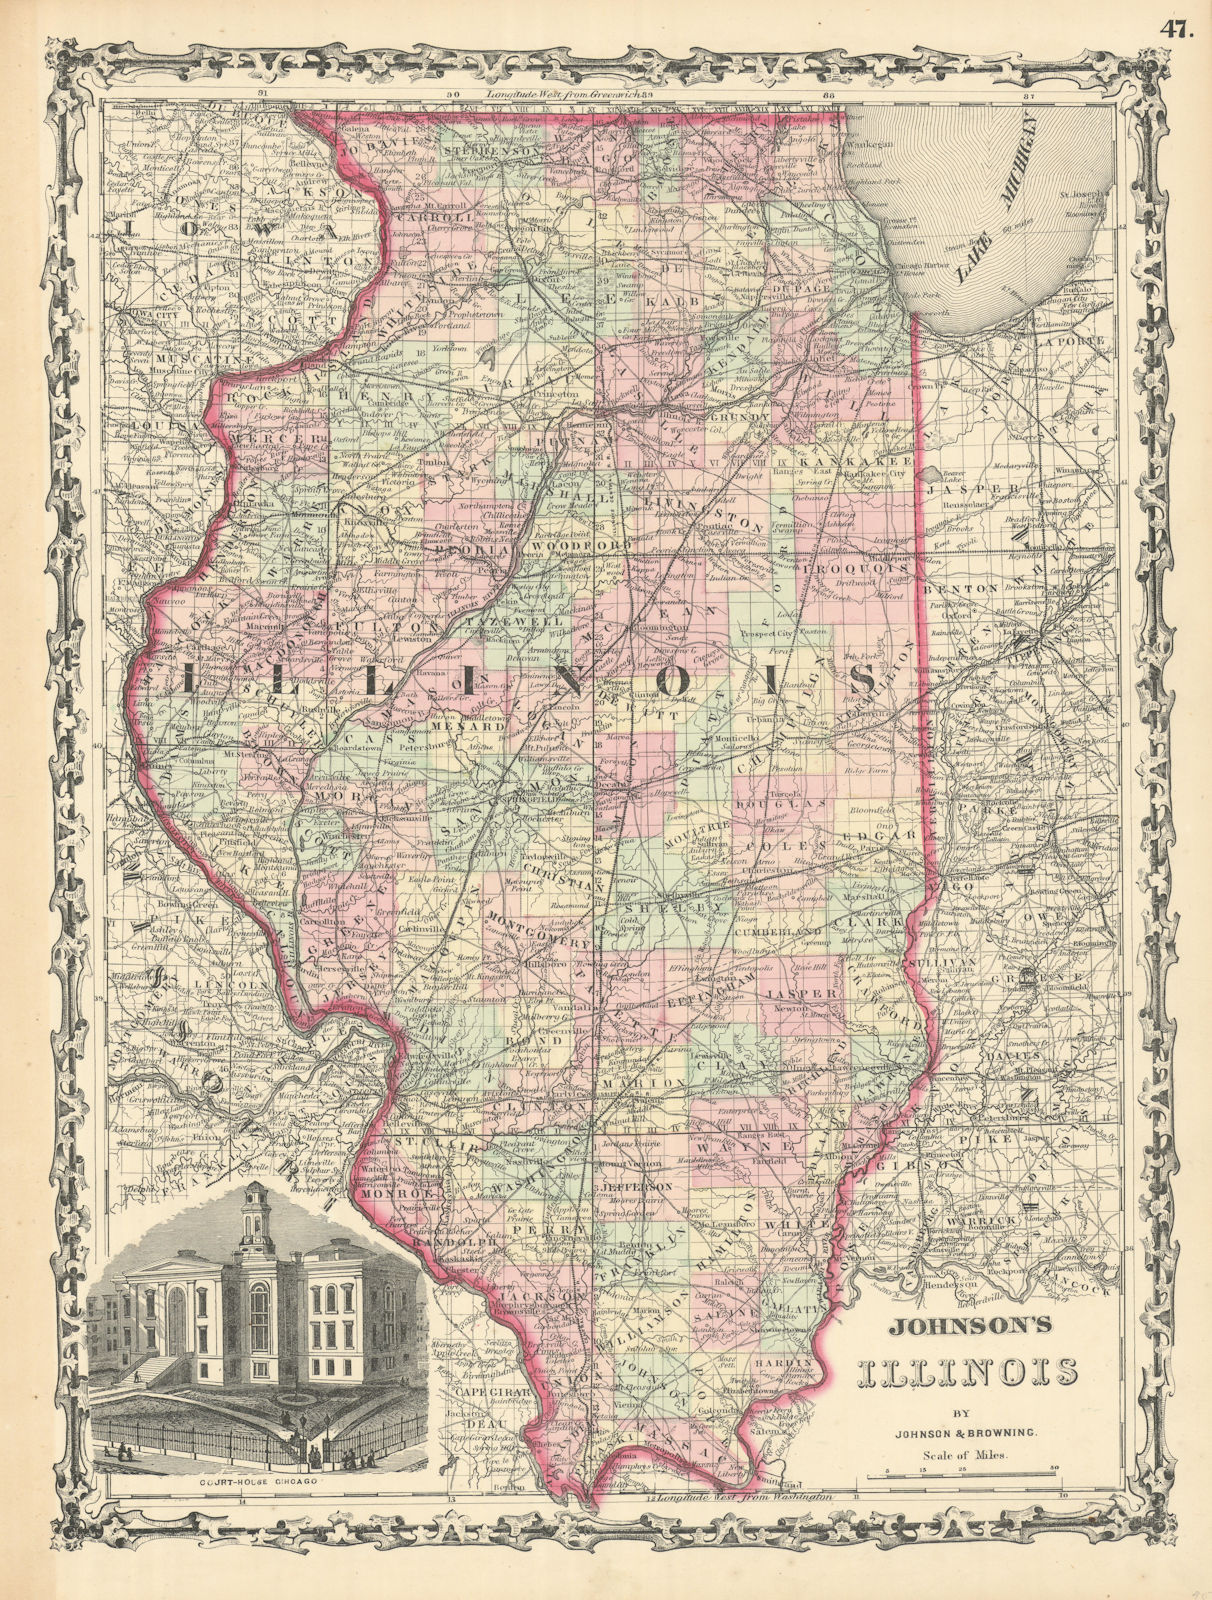 Johnson's Illinois. US state map showing counties 1861 old antique chart